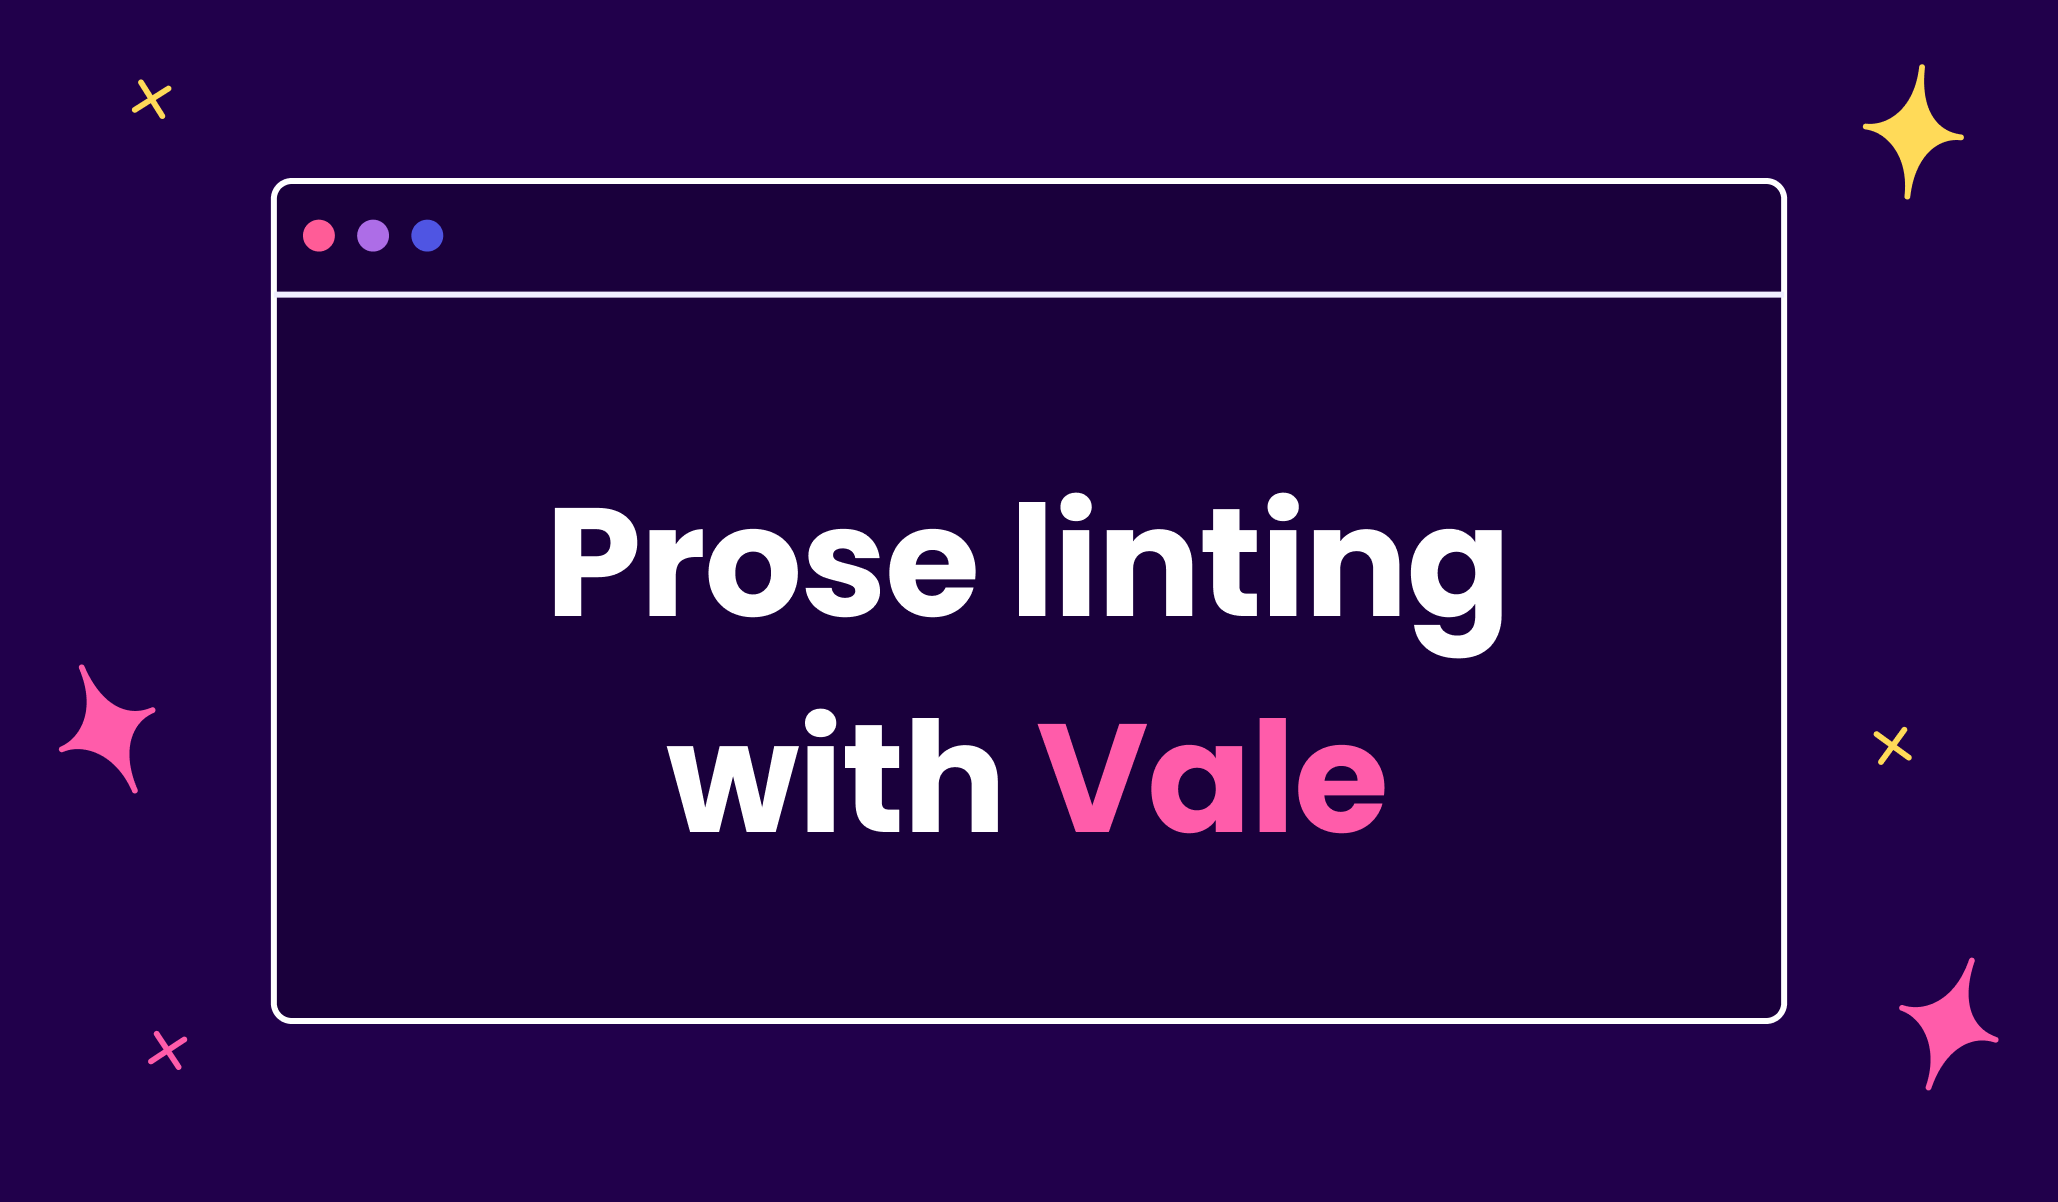 Prose linting with Vale